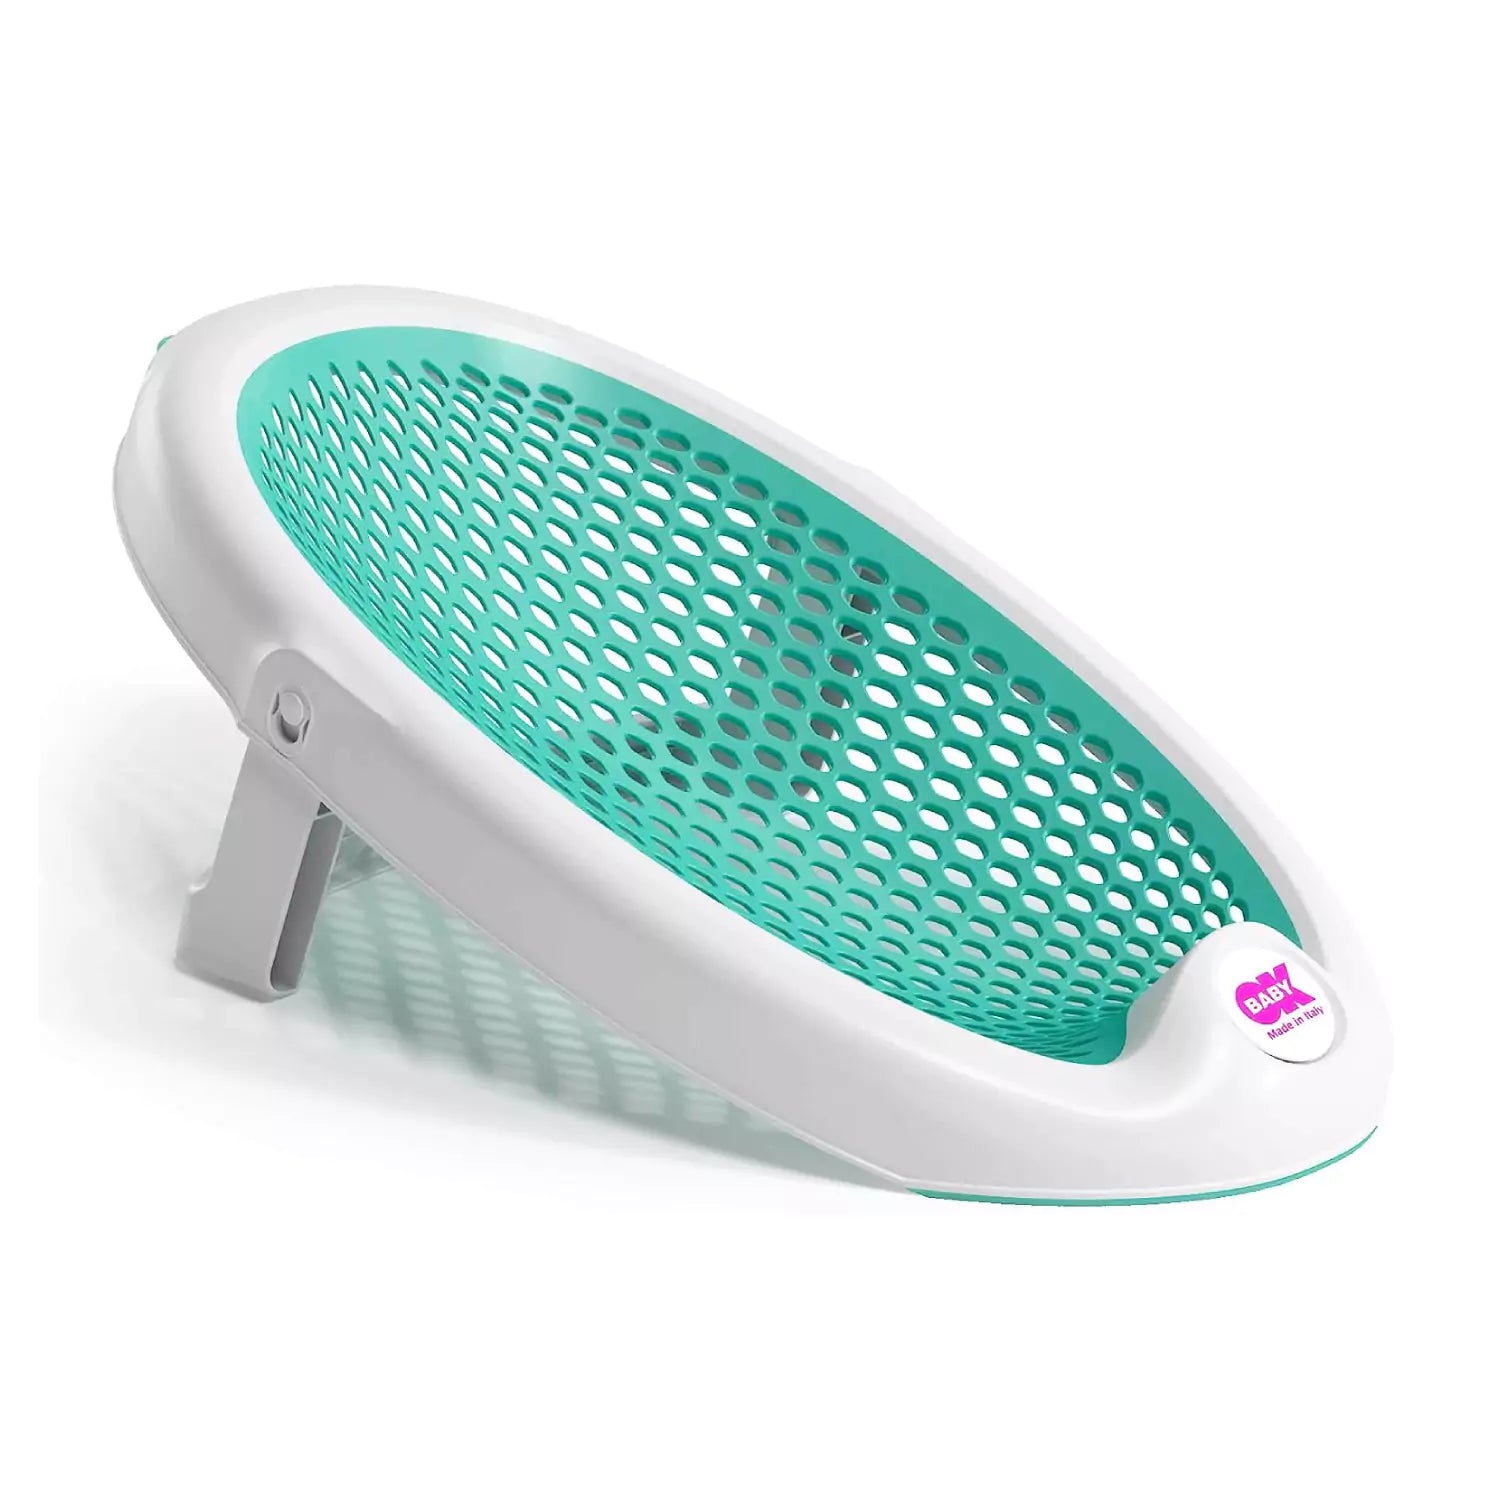 An image of Folding Baby Bath | Bathe Your Baby in Comfort & Safety Aqua